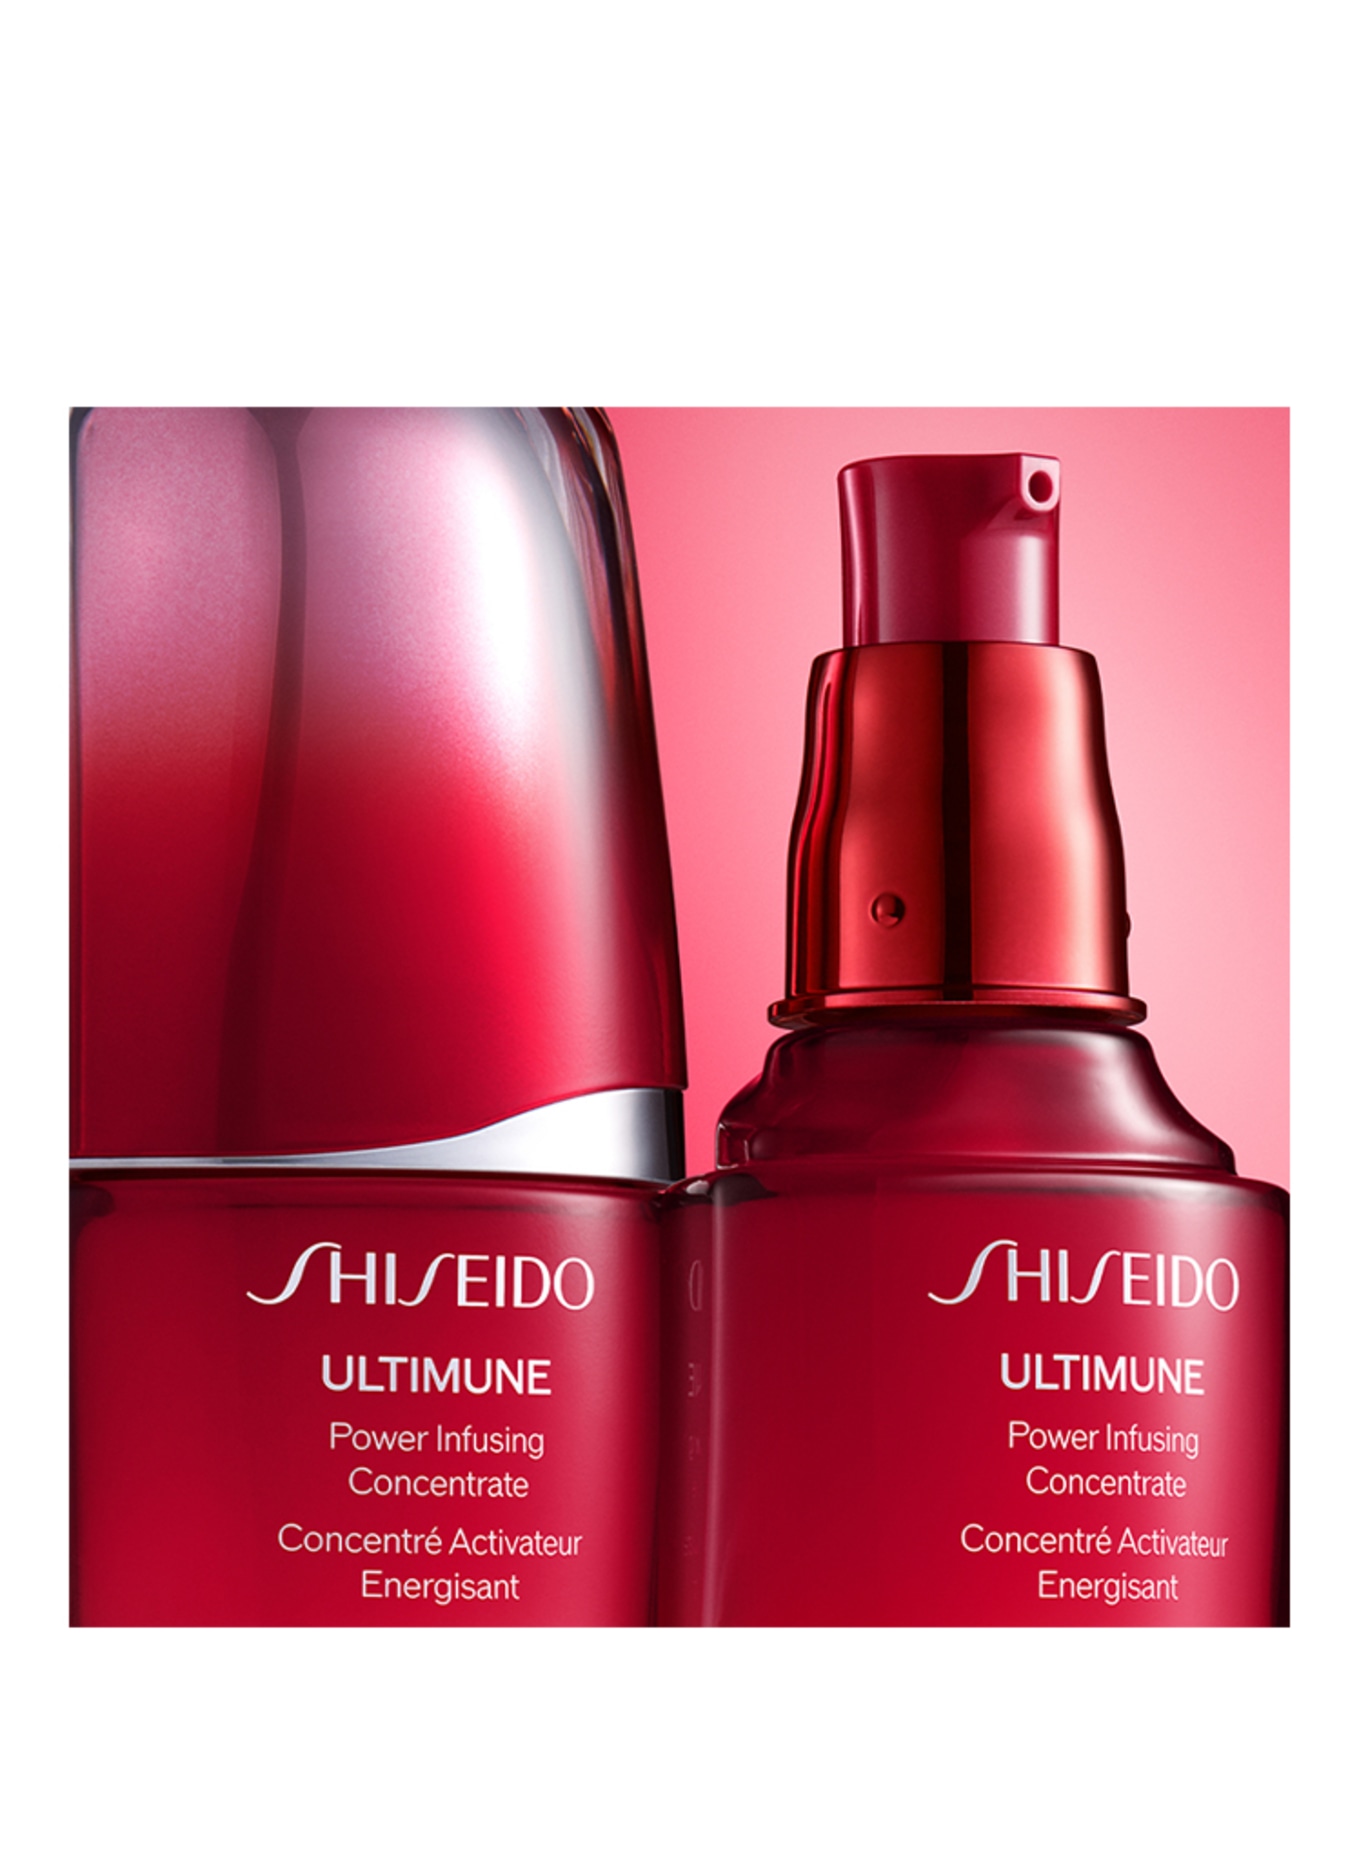 SHISEIDO ULTIMUNE POWER INFUSING CONCENTRATE (Bild 6)